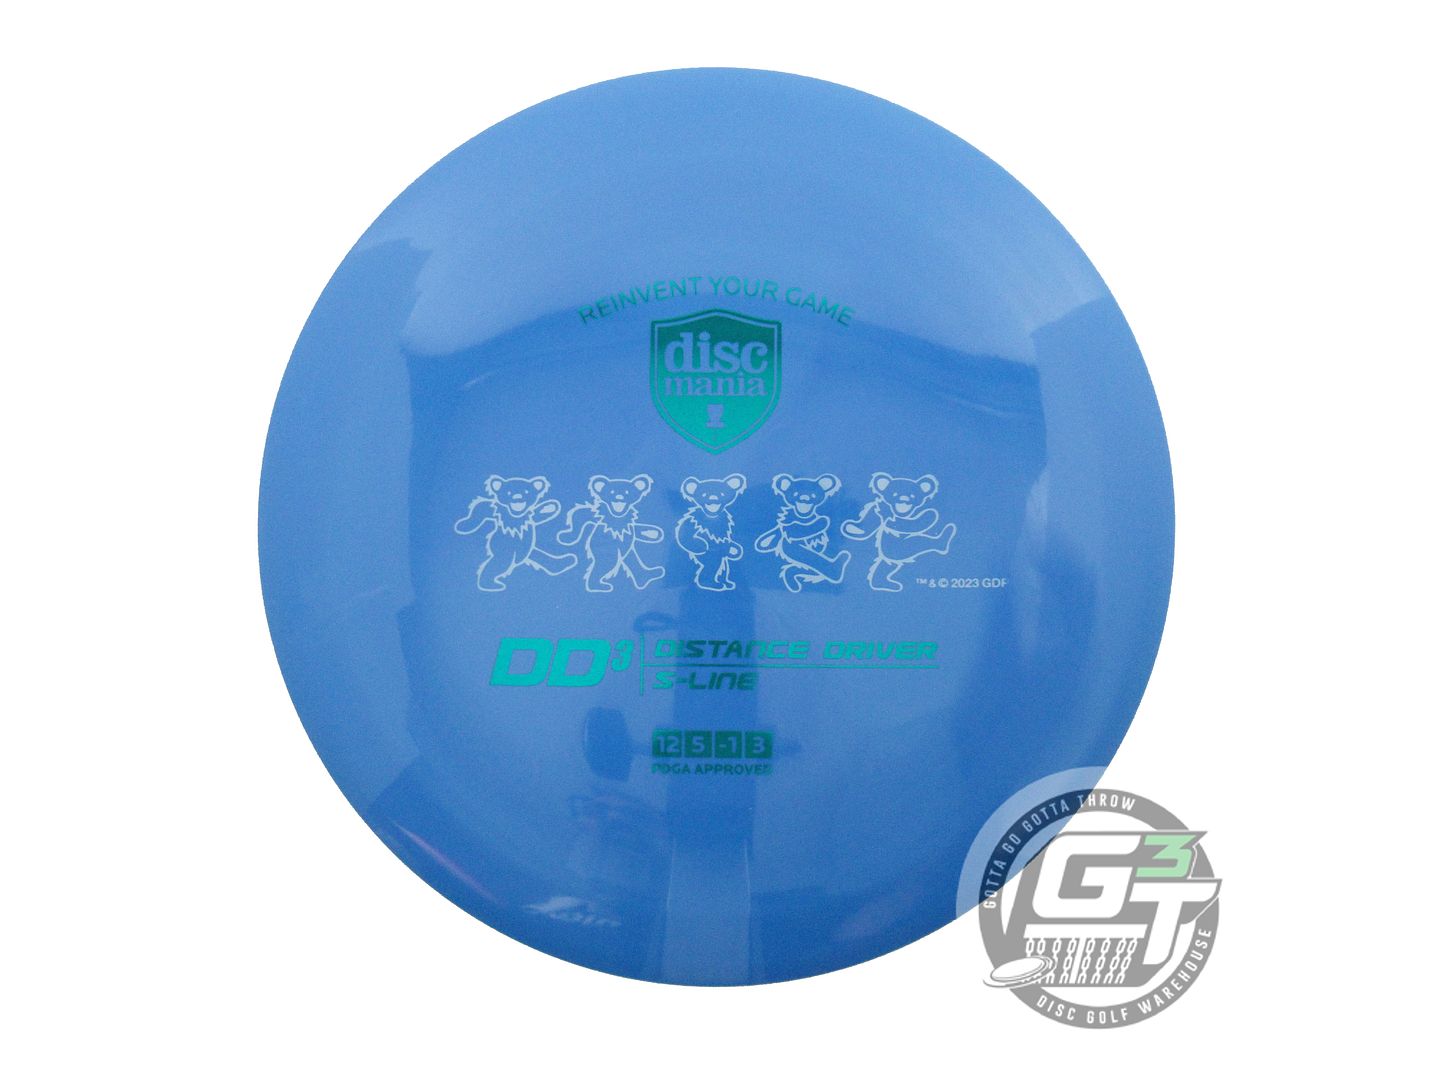 Discmania Limited Edition Grateful Dead Dancing Bears S-Line DD3 Distance Driver Golf Disc (Individually Listed)